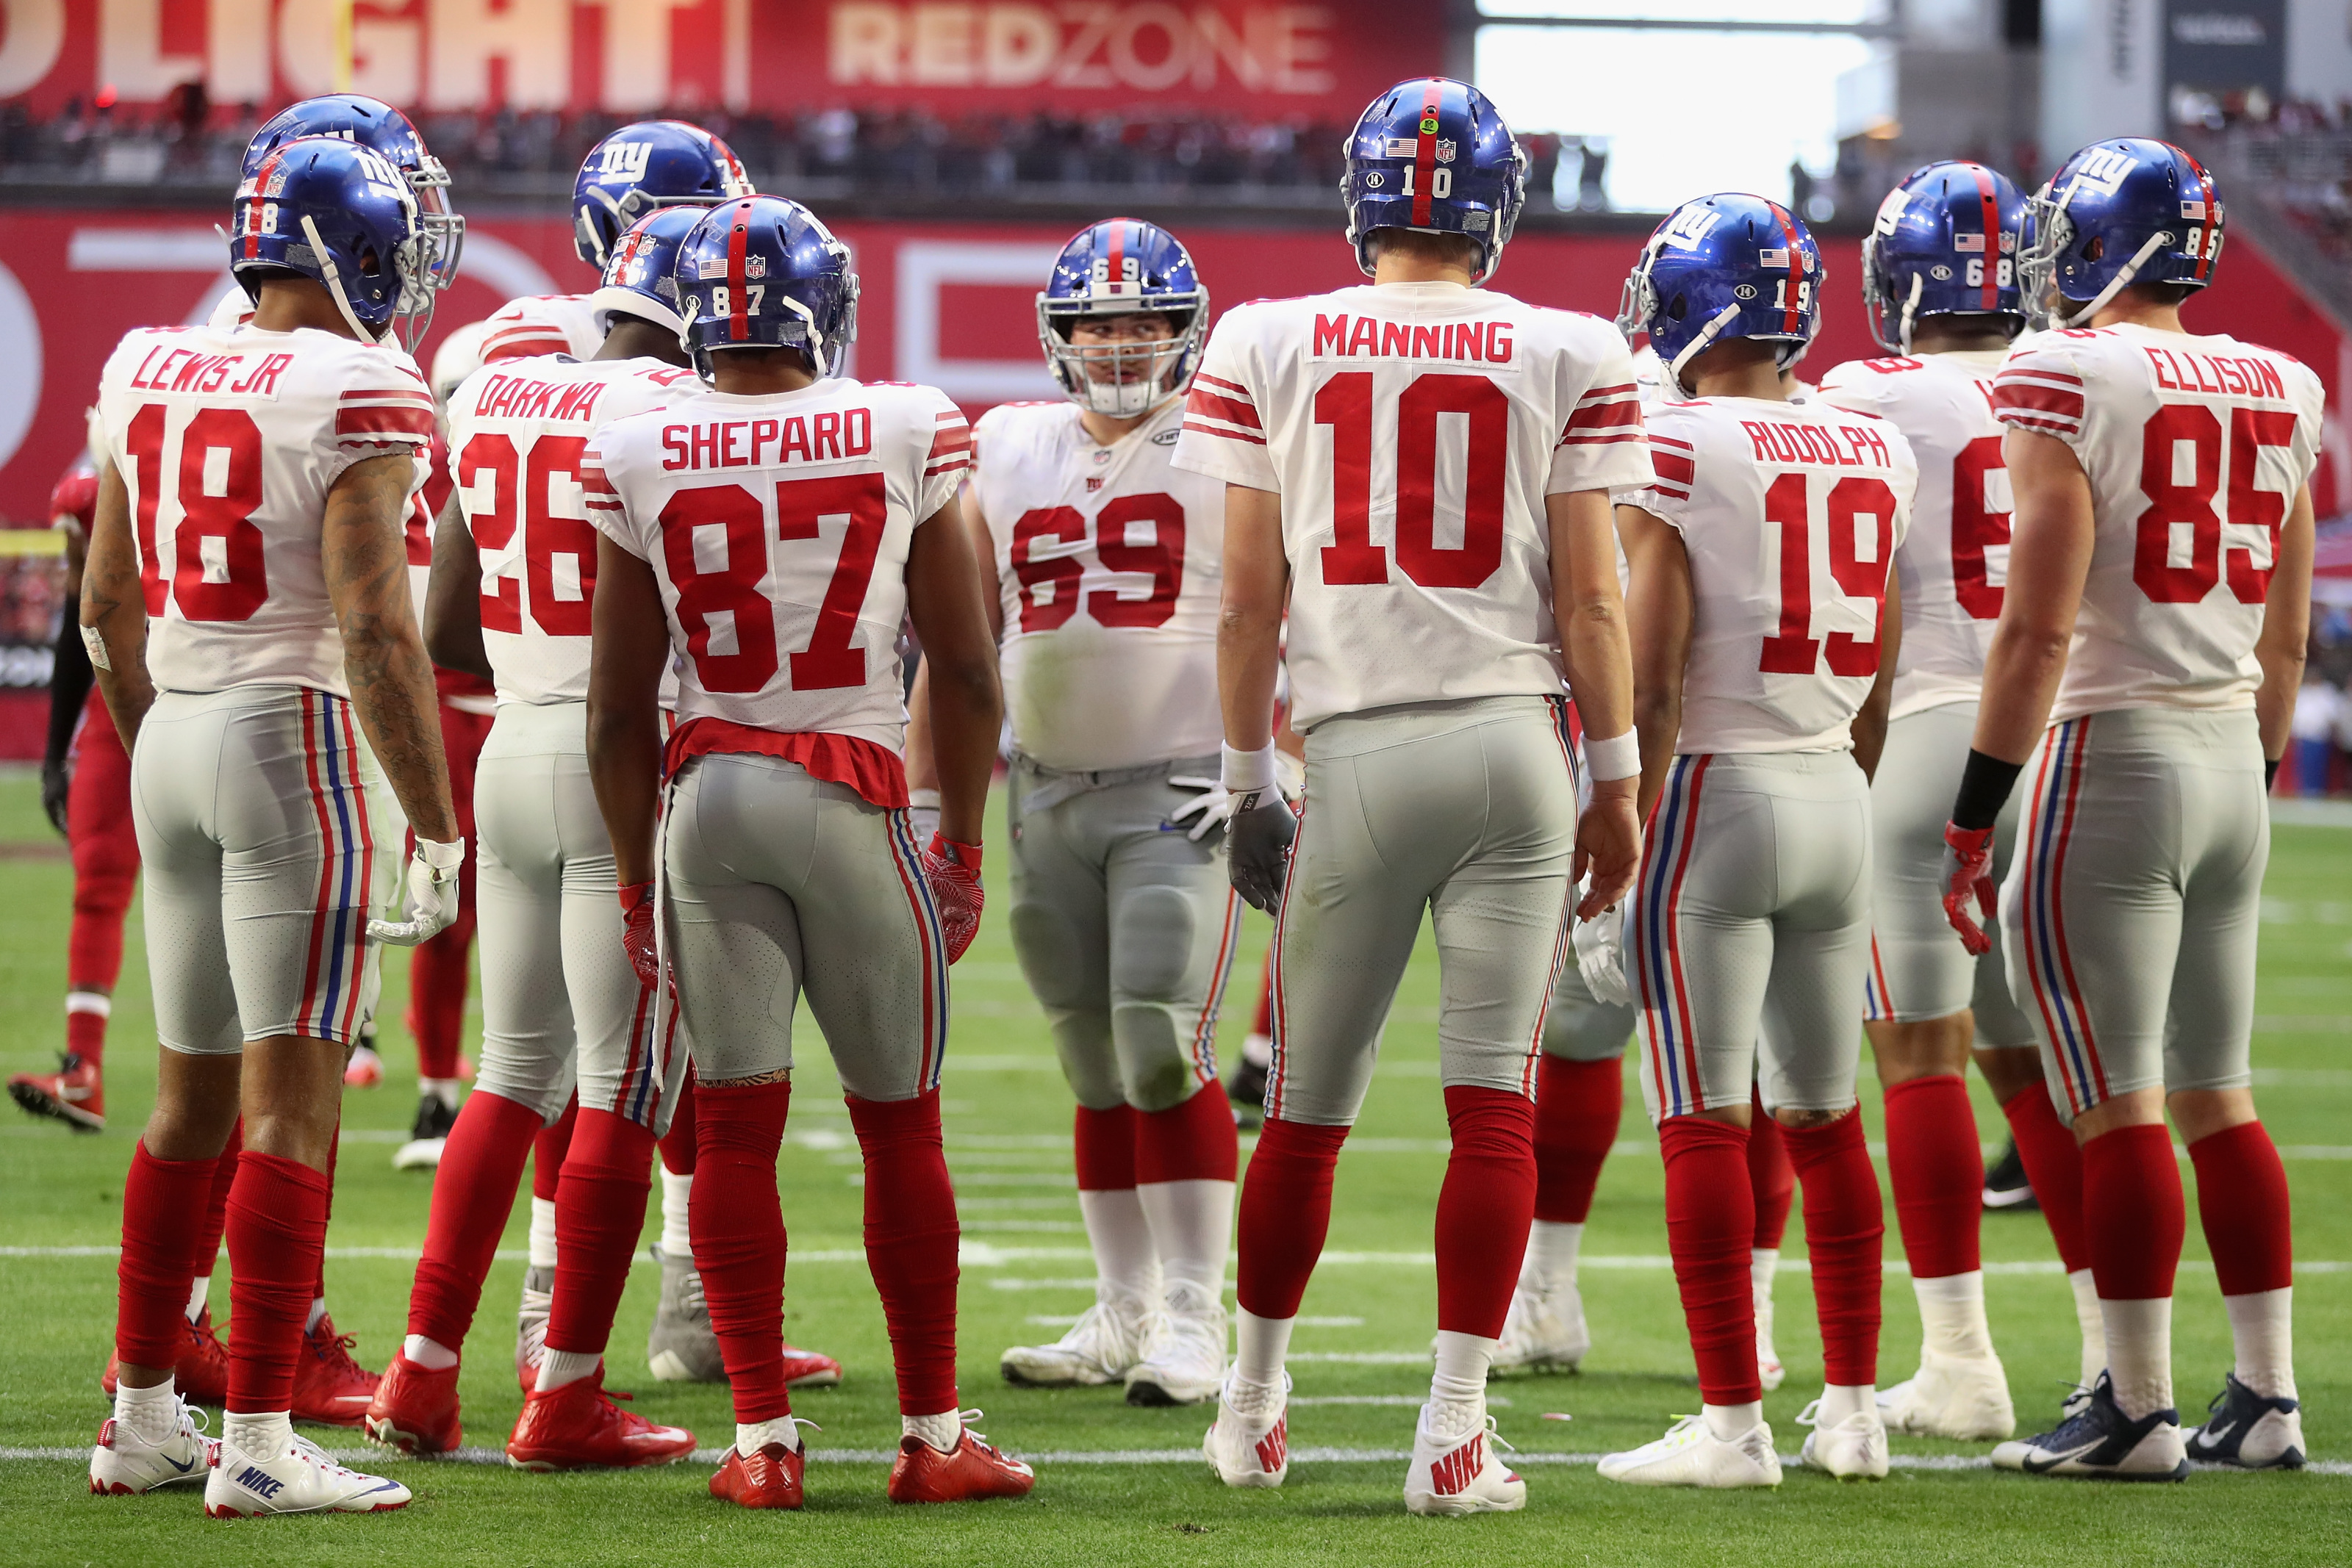 New York Giants: Best trade partner for the No. 2 overall pick